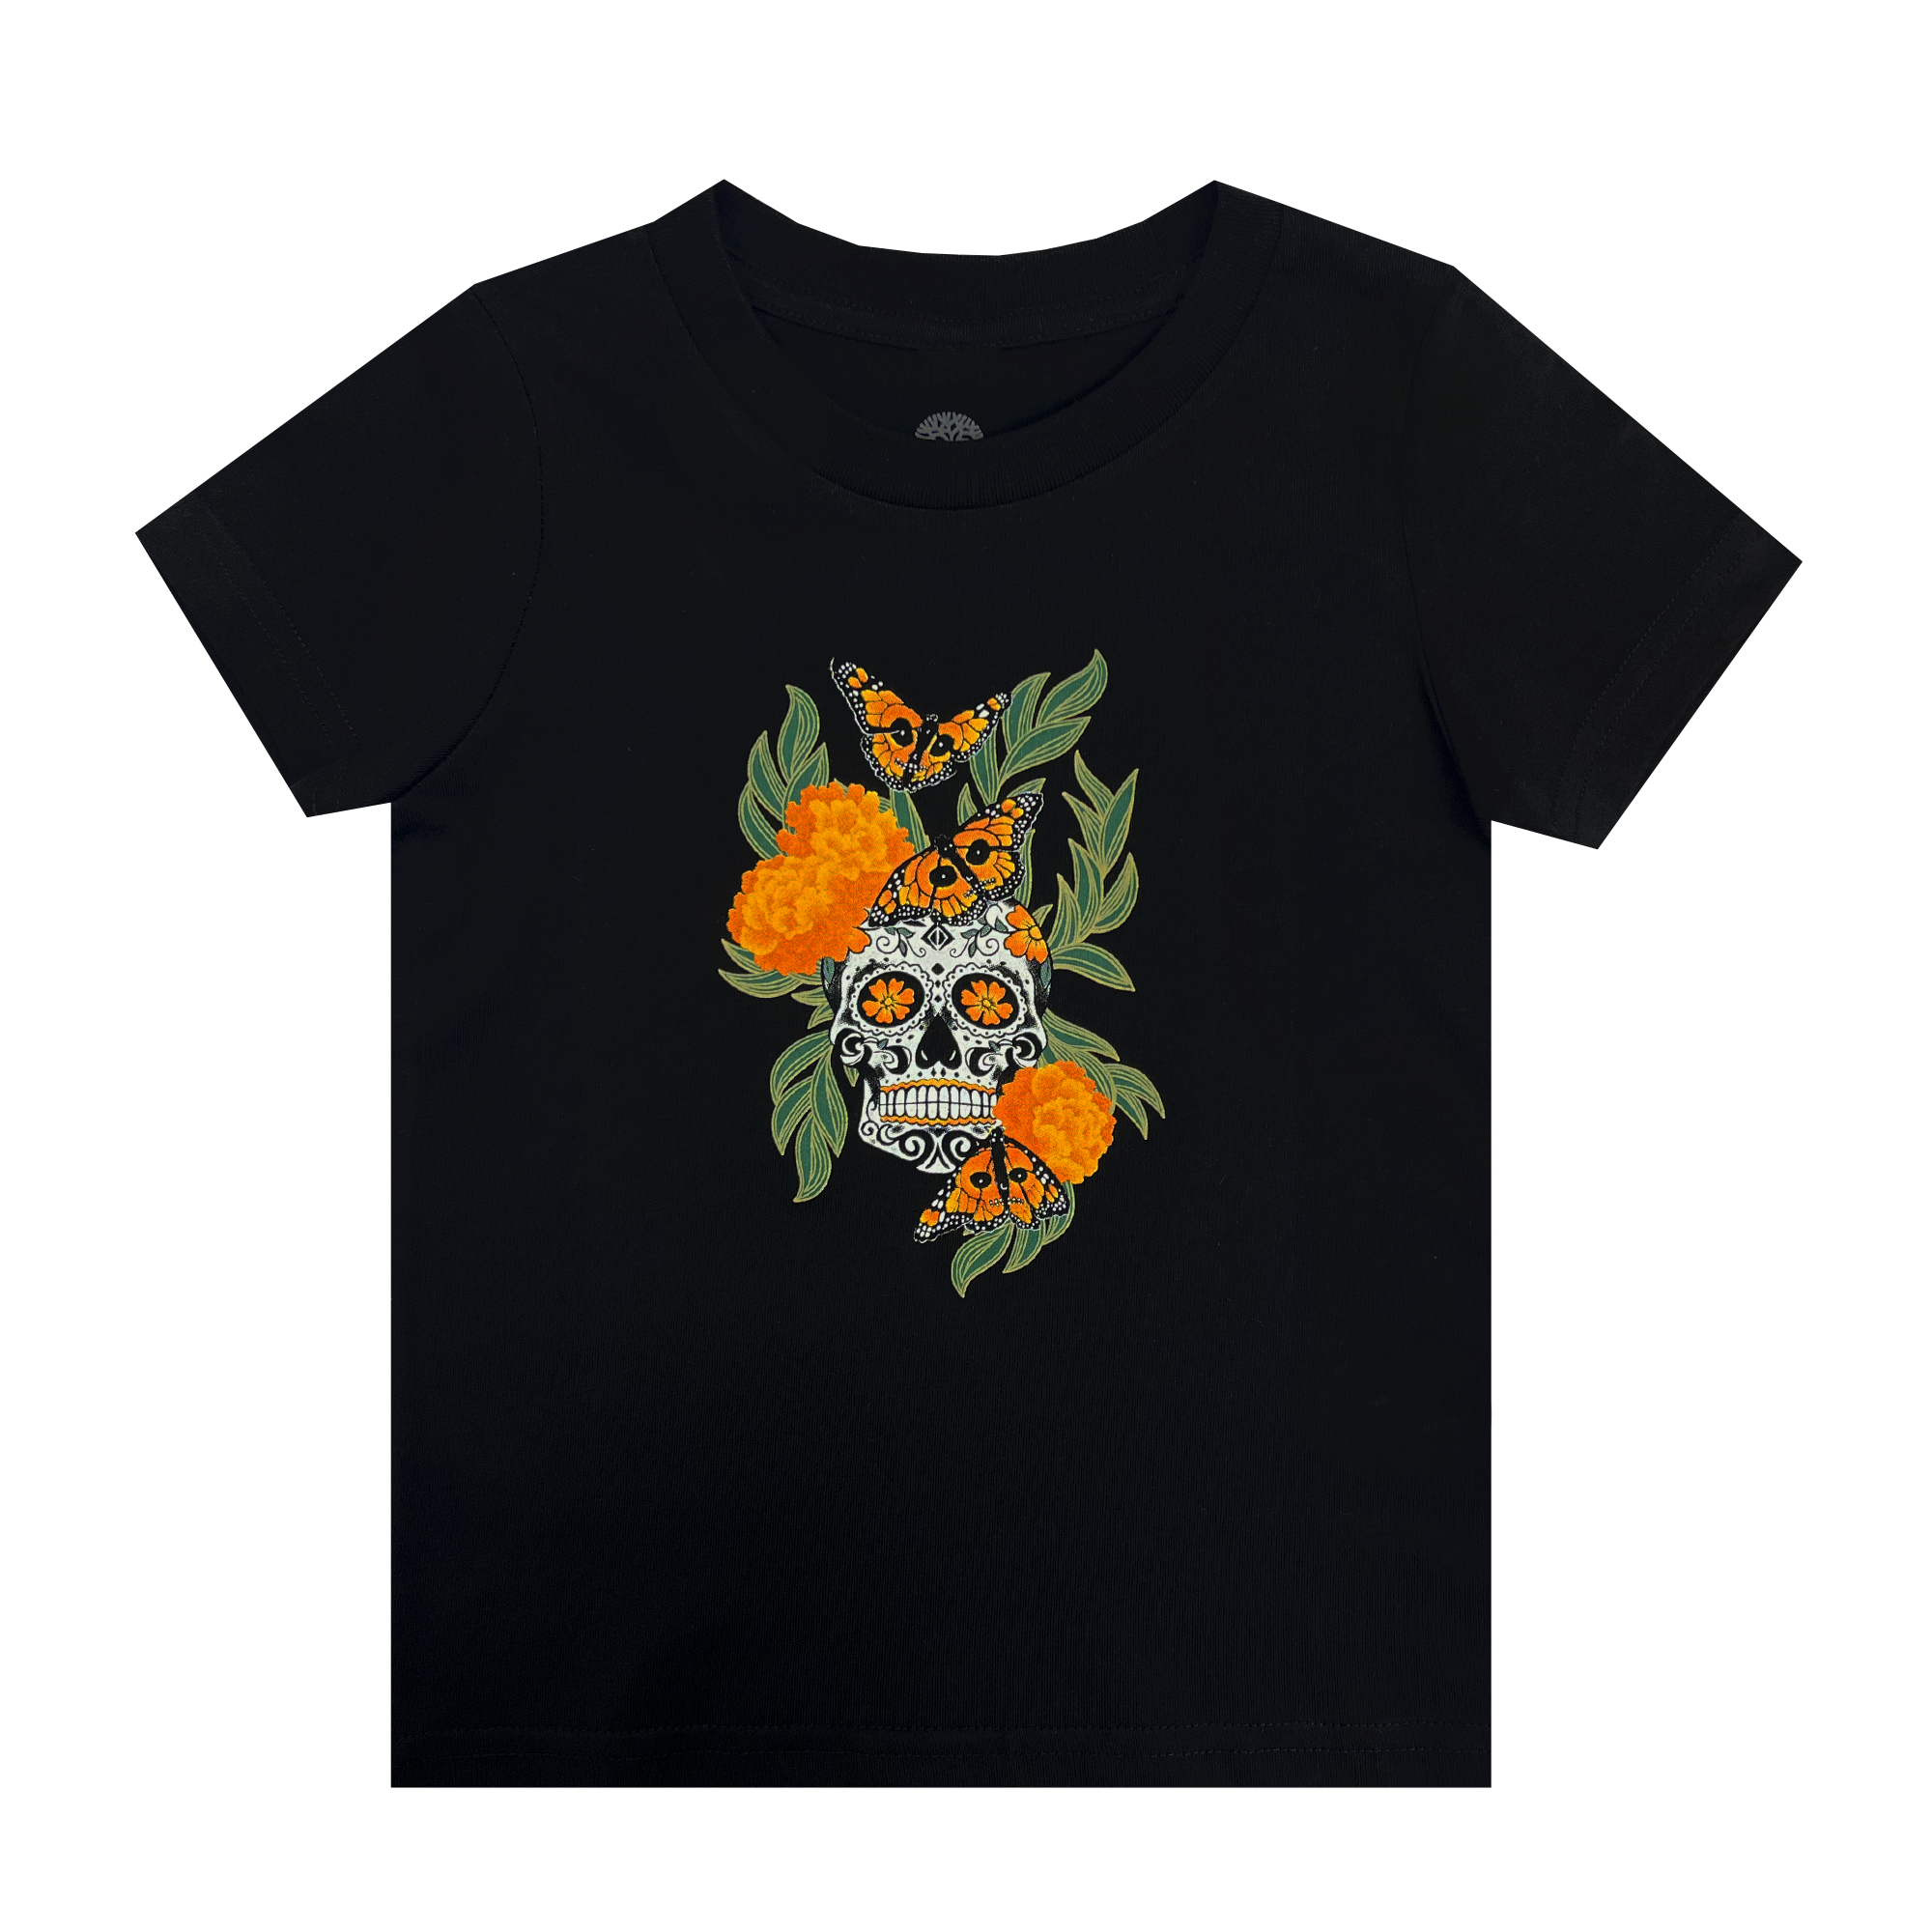 Black toddler t-shirt with graphic art by Oakland artist Jet Martinez depicting a sugar skull surrounded by Marigolds and Monarch butterflies.